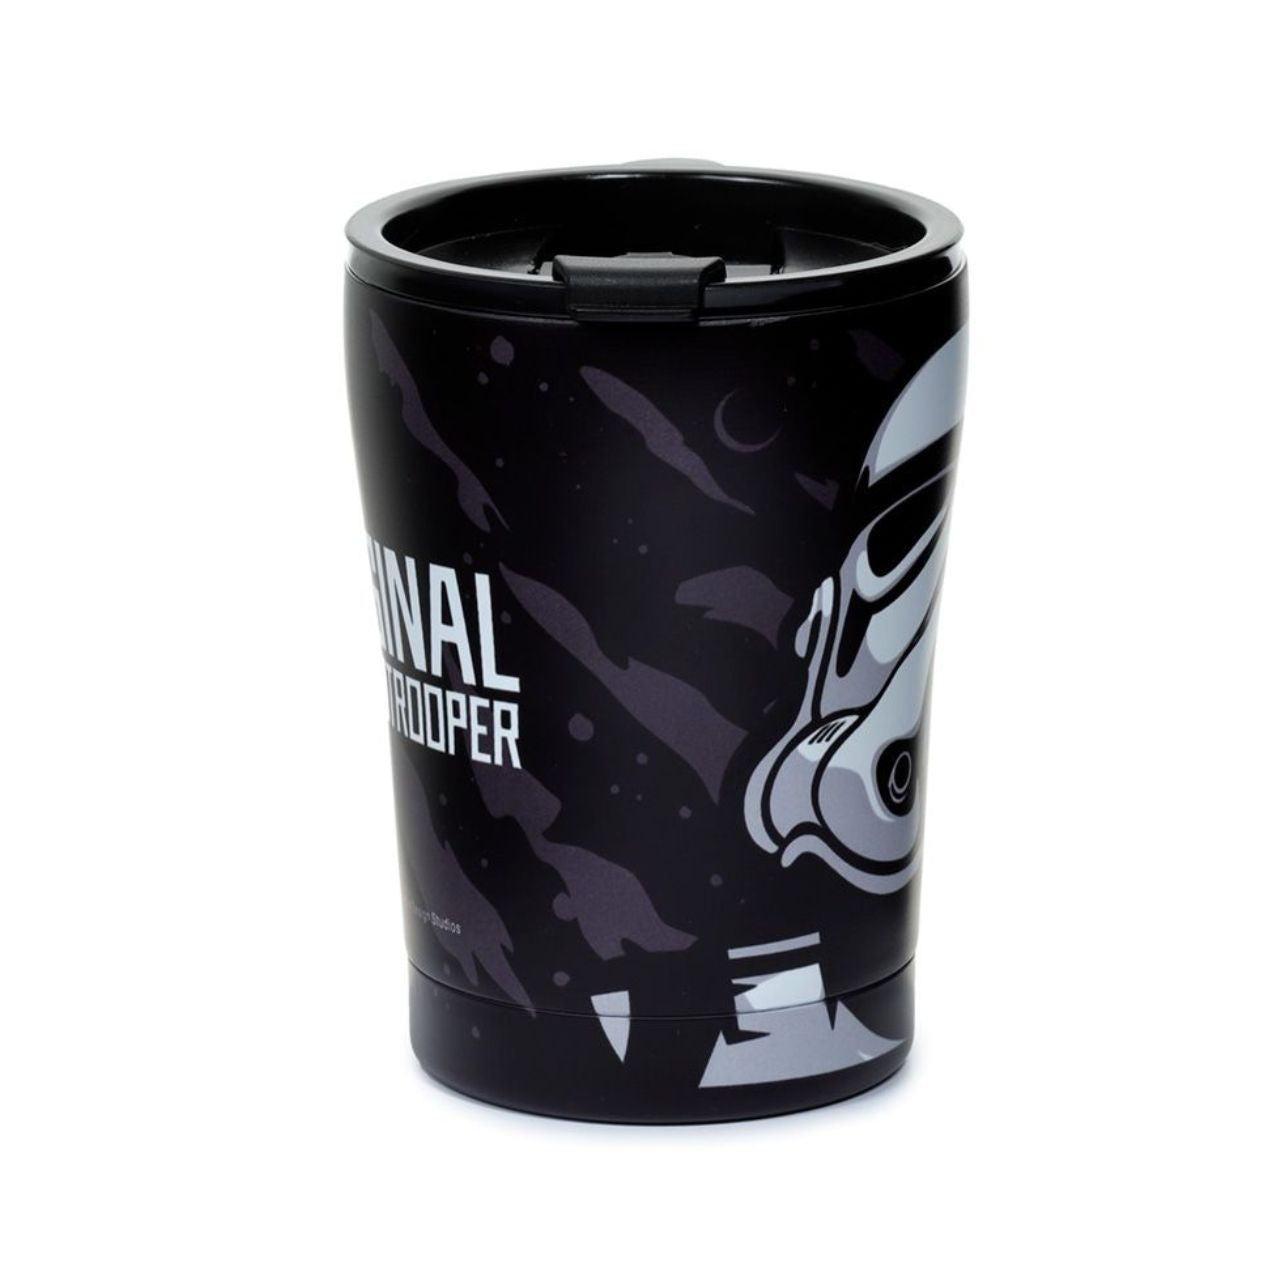 The Original Stormtrooper Hot & Cold Insulated Cup 300ml   Insulated design suitable for hot and cold drinks. Thermal design keeps liquids cold for up to 8 hours or warm for up to 6 hours. The lid has a steam release valve in the centre and a secure flip up cover over the drinking hole.